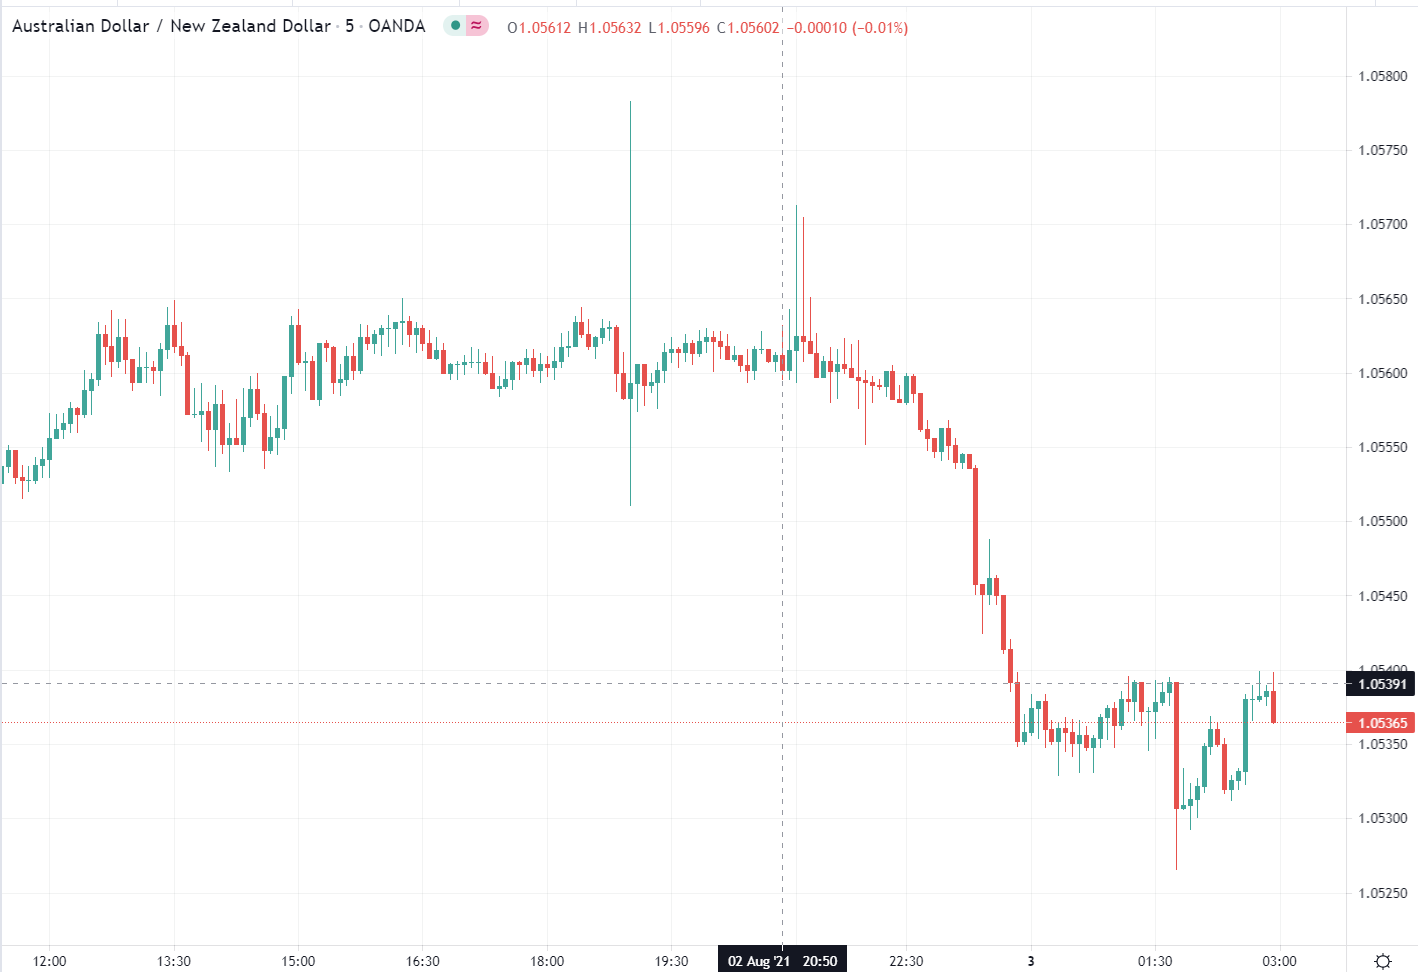 Forex news for Asia trading onTuesday3August 2021